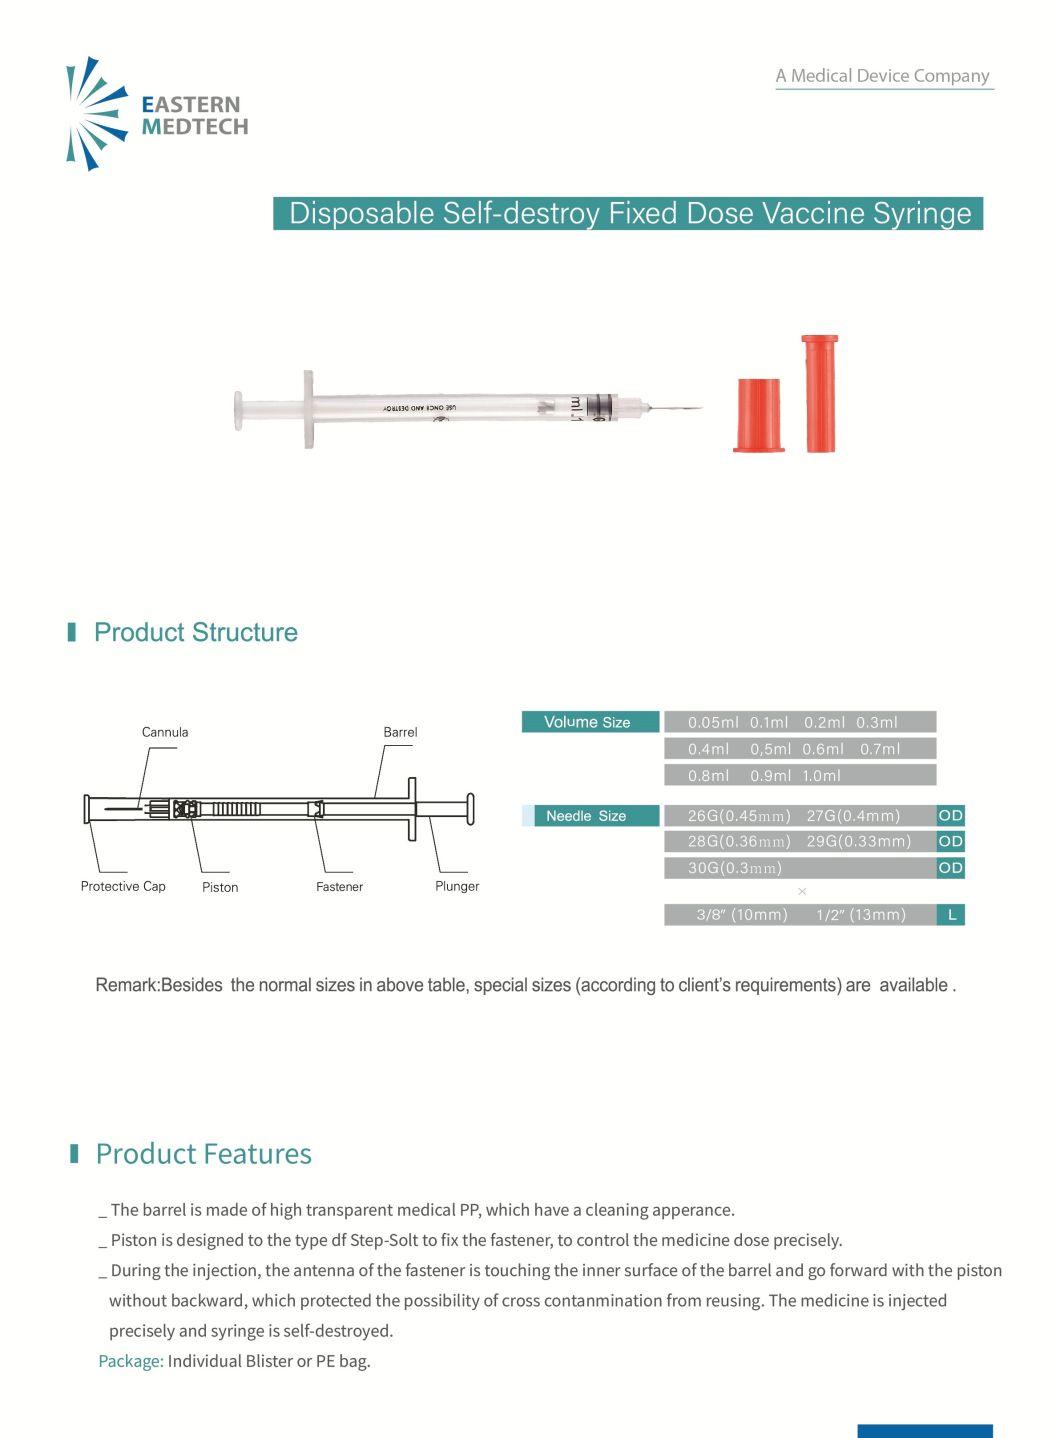 Auto Disable Syringe Sterilized for Vaccine Injection with Fixed Needle